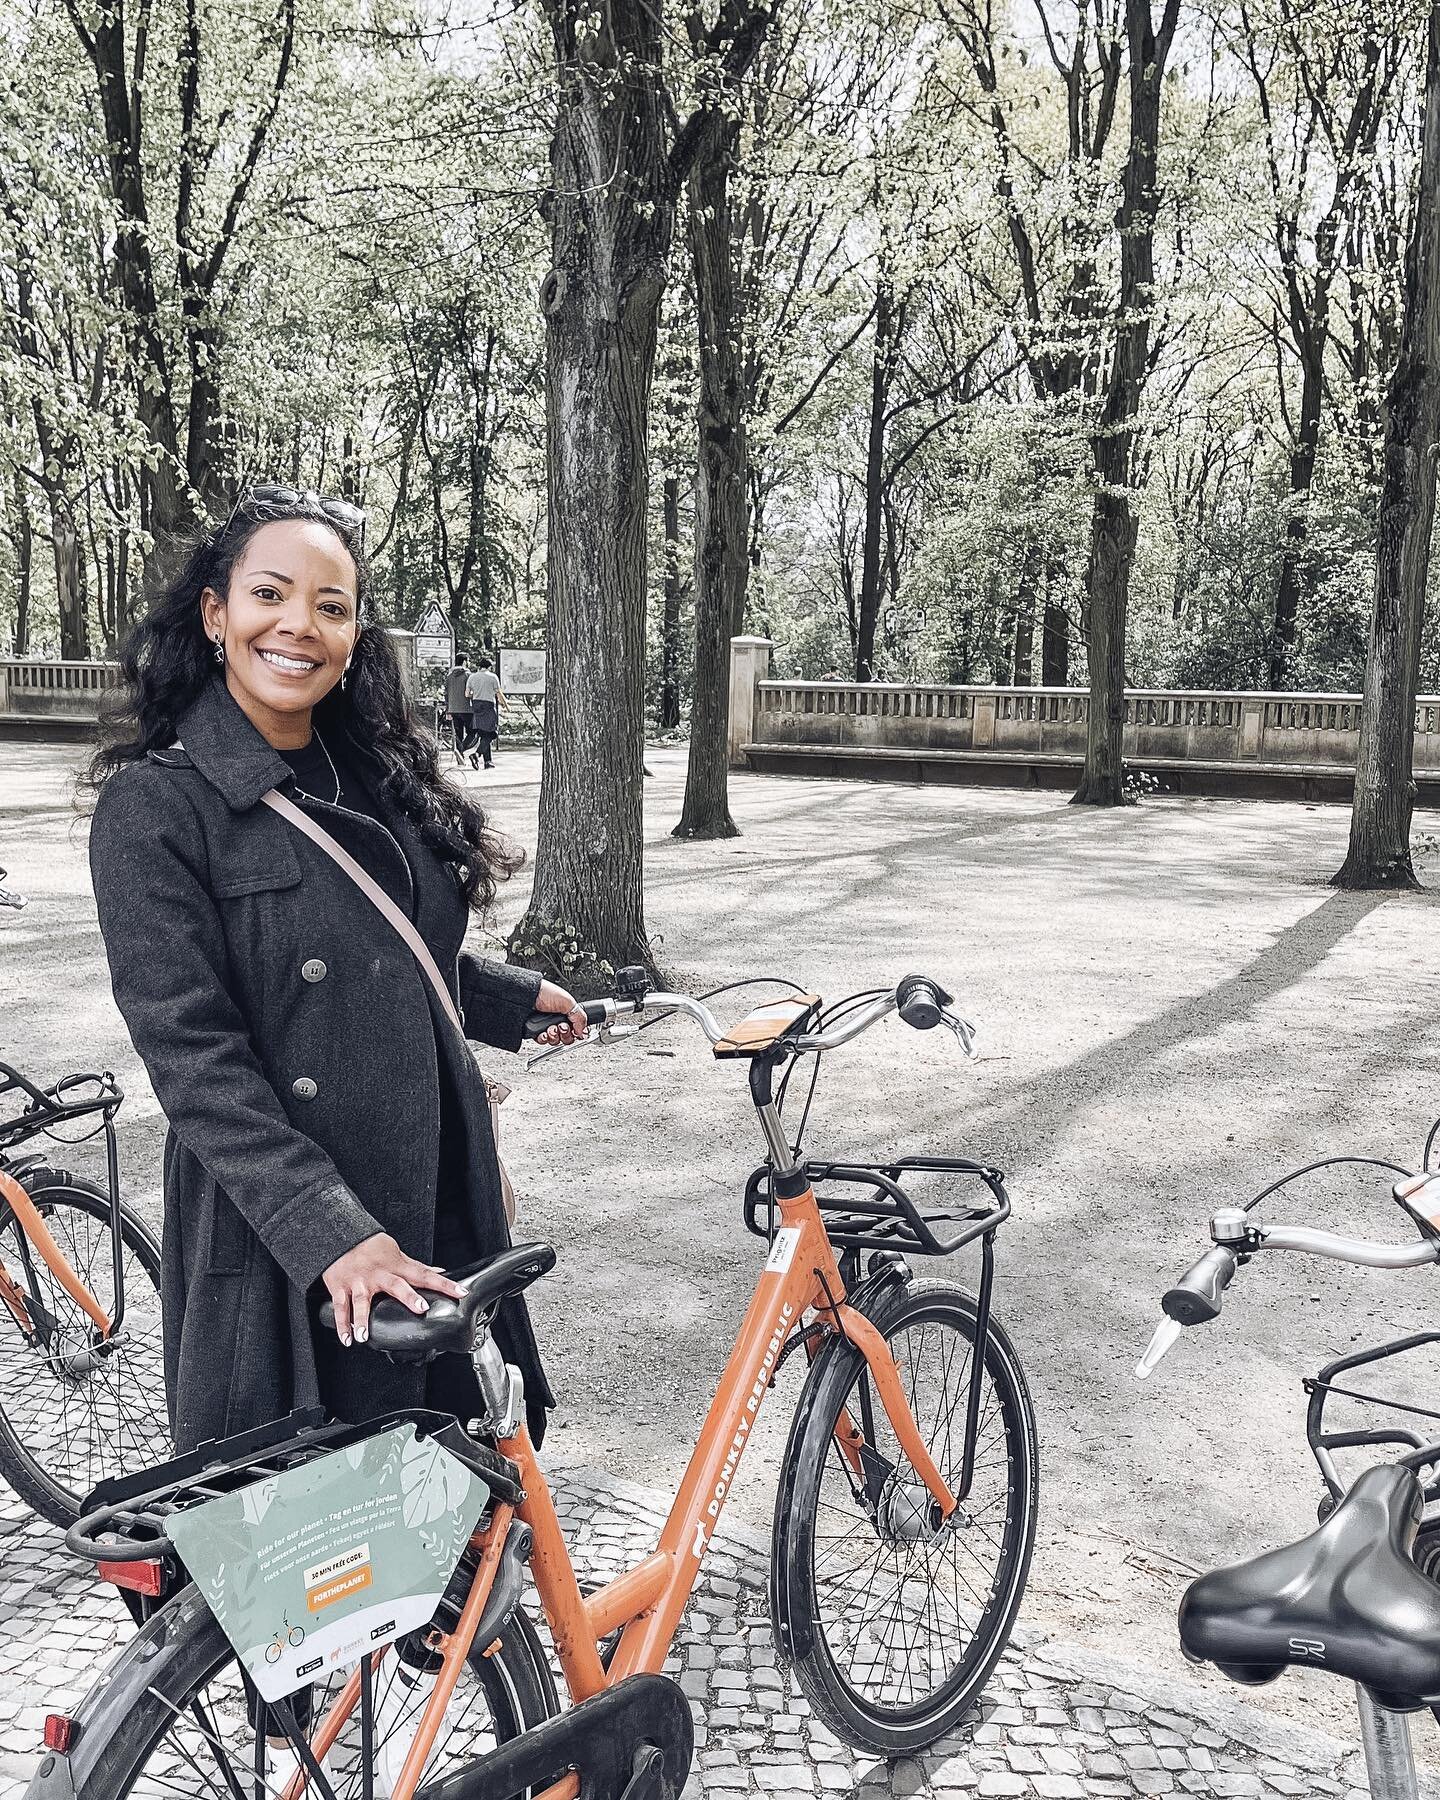 Biking through the amazing parks Tiergarten and Tempelhofer Feld in Berlin was a fun experience! With the Donkey Republic app, renting bikes to explore was easy! 🙌🚲 You can rent two bikes with one app which is nice.⁣
⁣
Don't miss out on the fun, ho